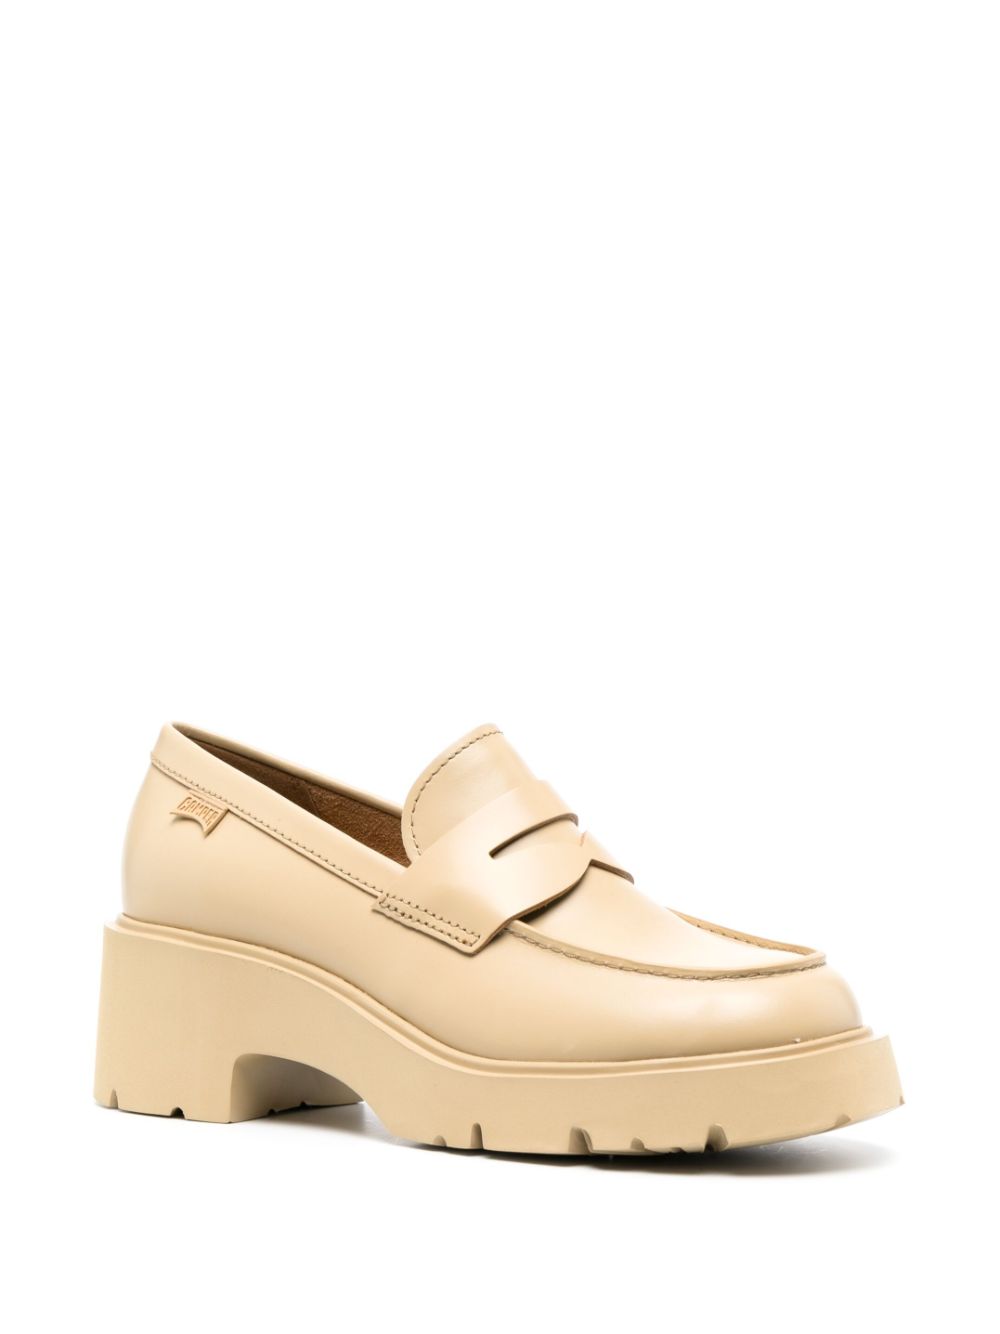 Camper Milah chunky leather loafers - Beige